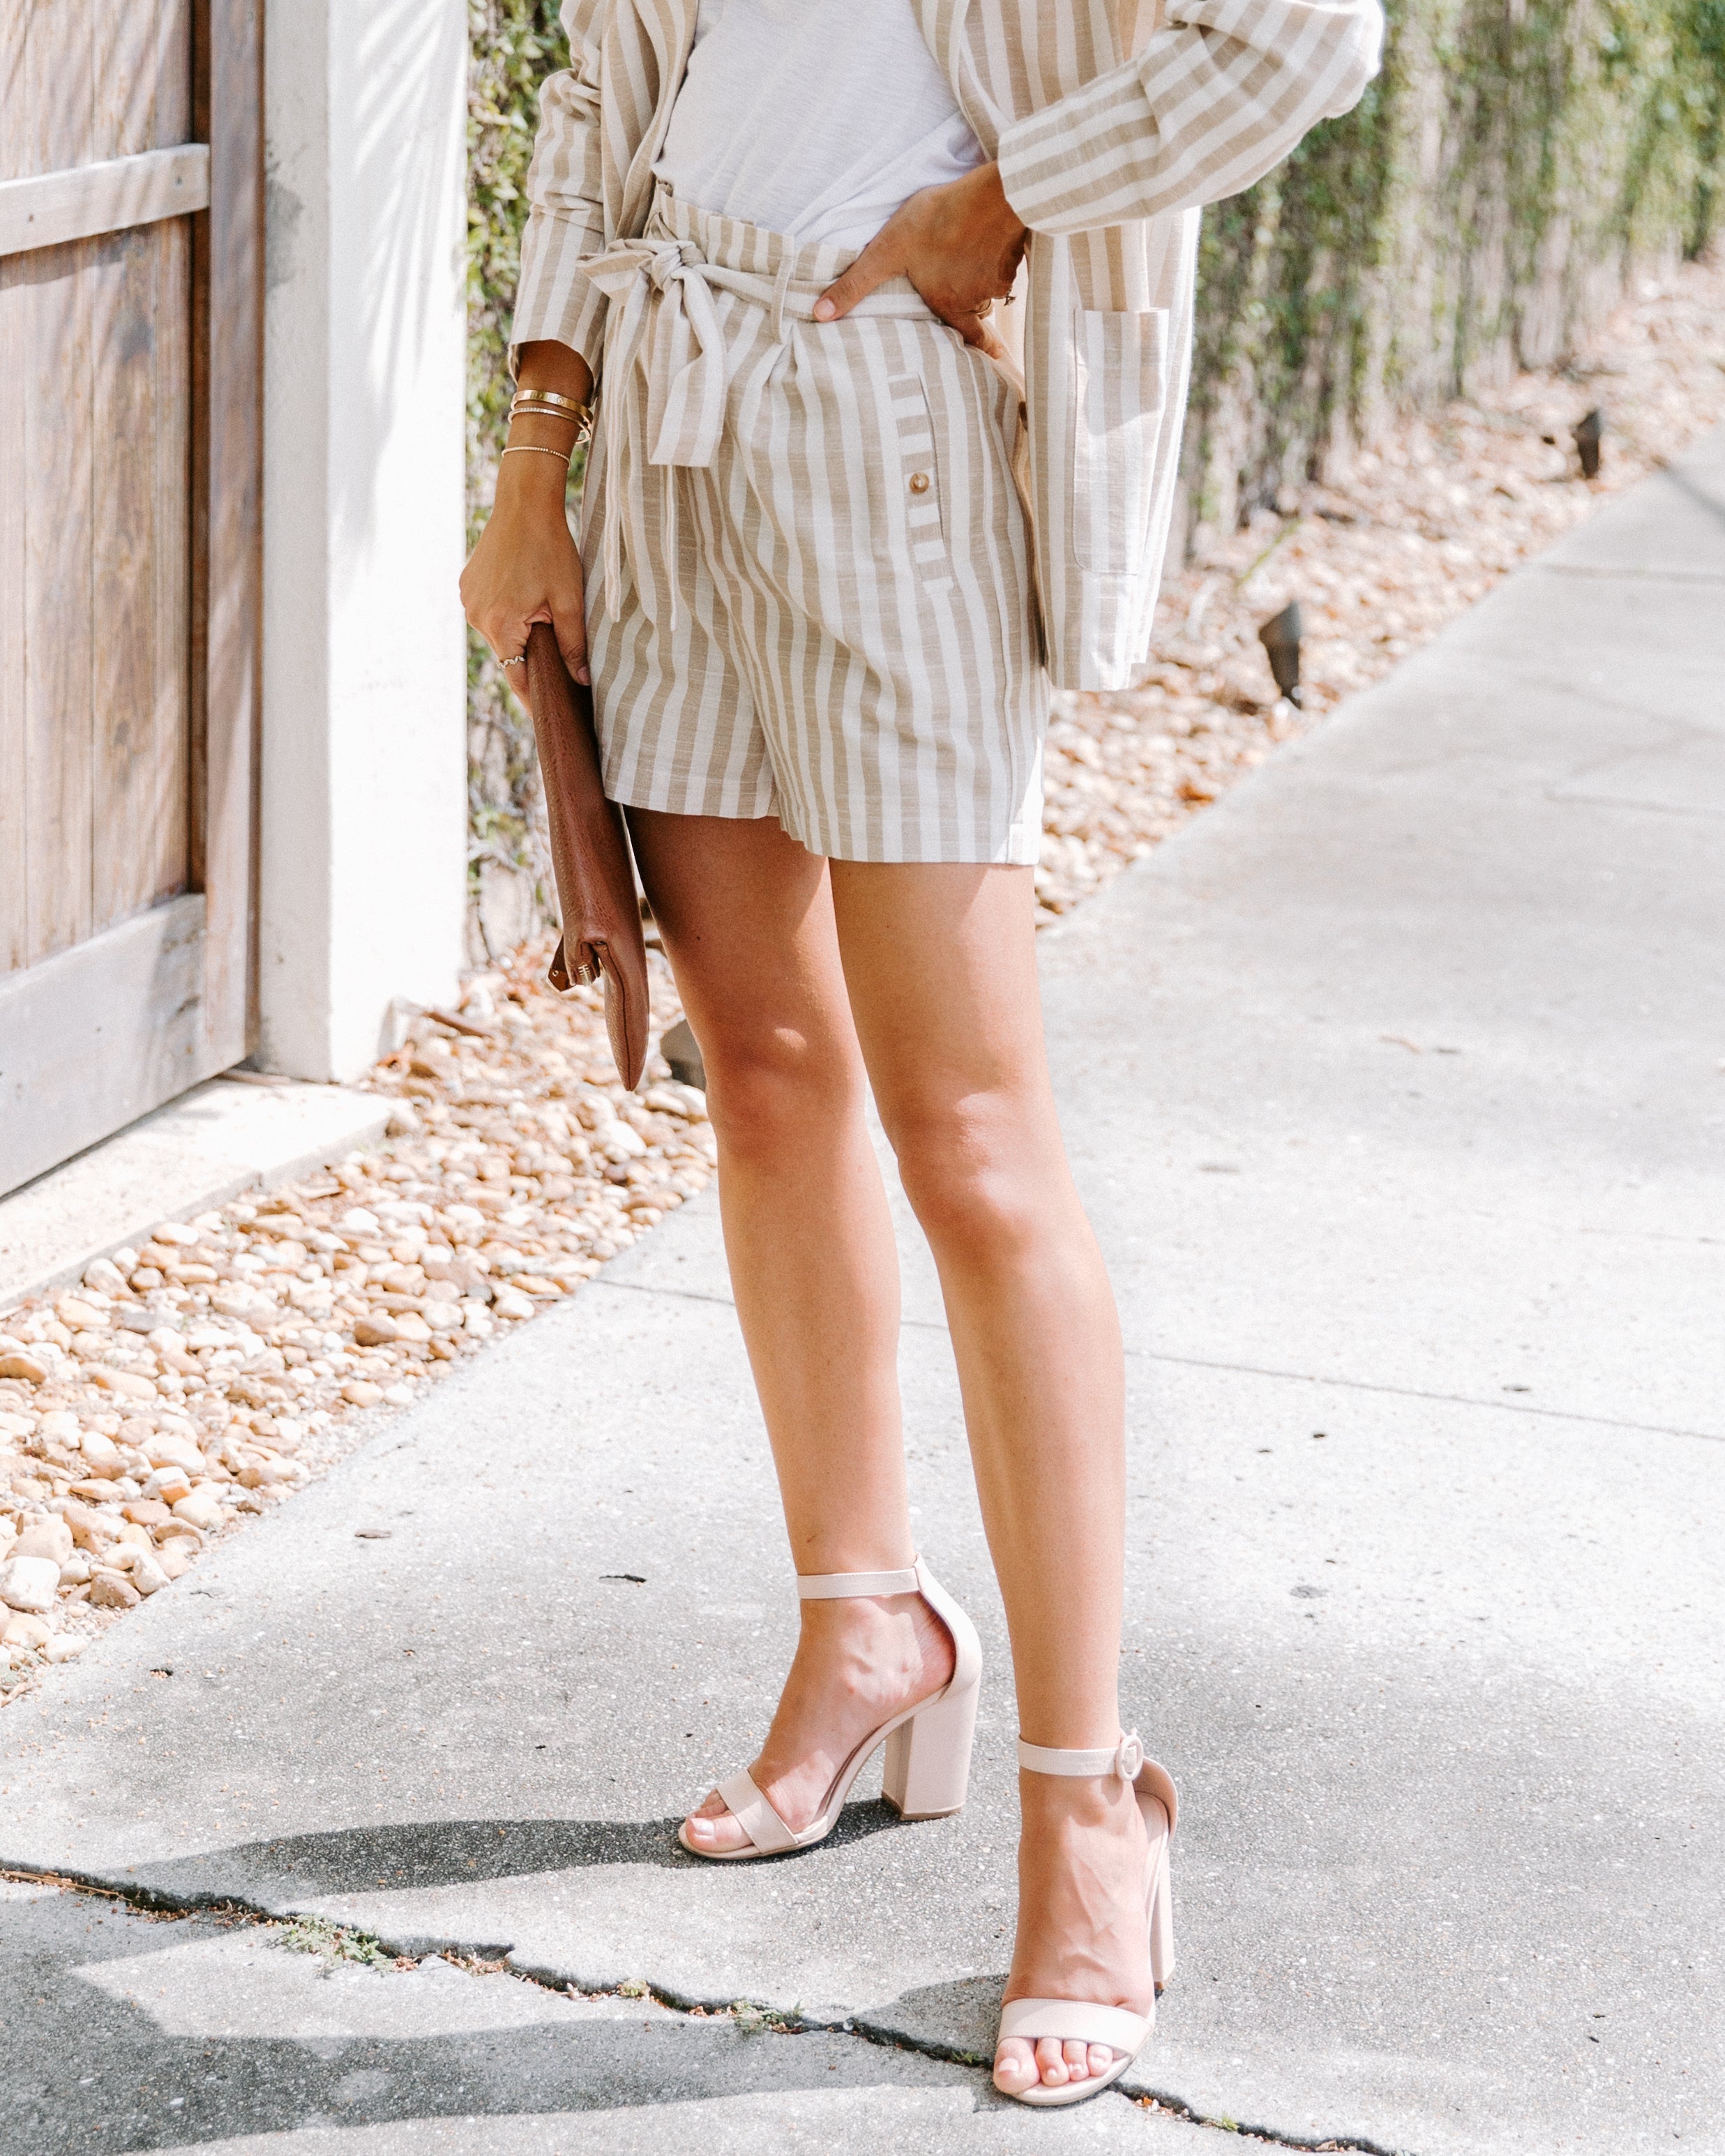 Thousand Palms Cotton Pocketed Striped Shorts